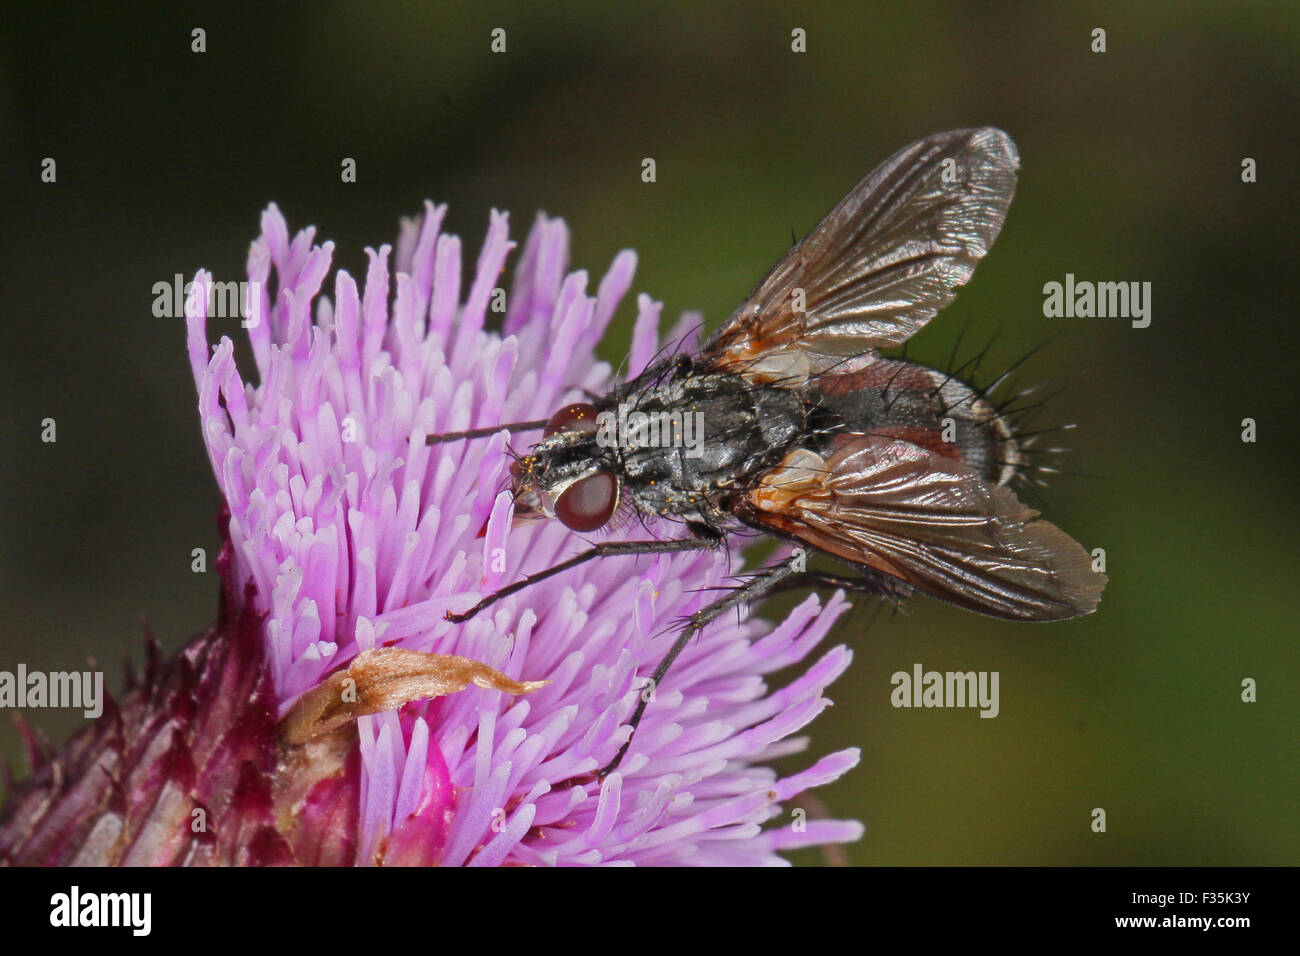 Close up macro photo of a fly feeding on an thistle flower head. Stock Photo